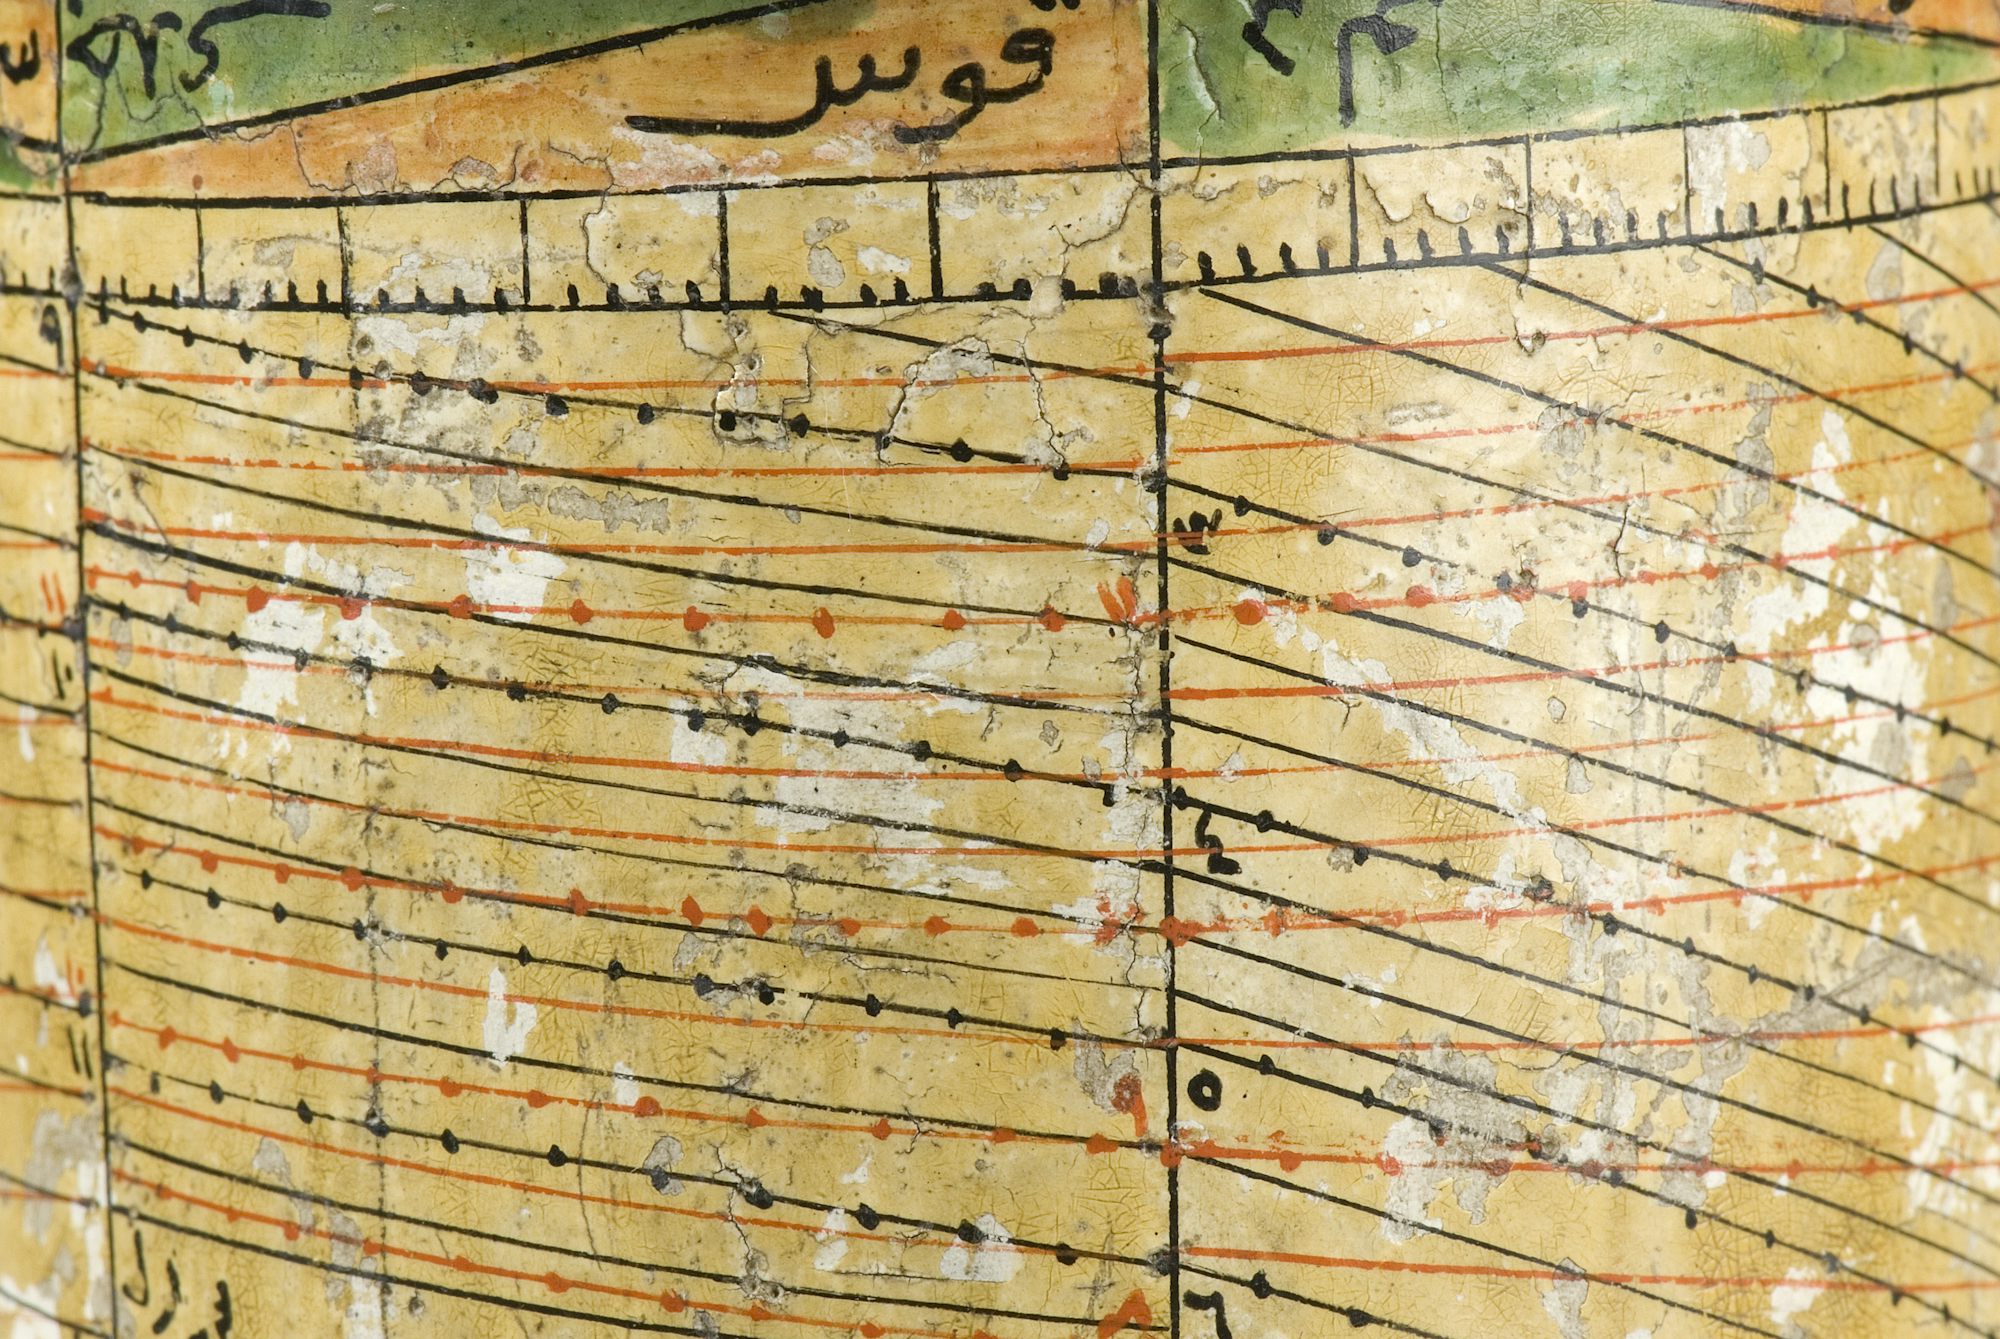 Ottoman Pillar Dial showing equinoctial hours and time alla Turca (inventory no. 7184, The Collection of Historical Scientific Instruments, Harvard University)